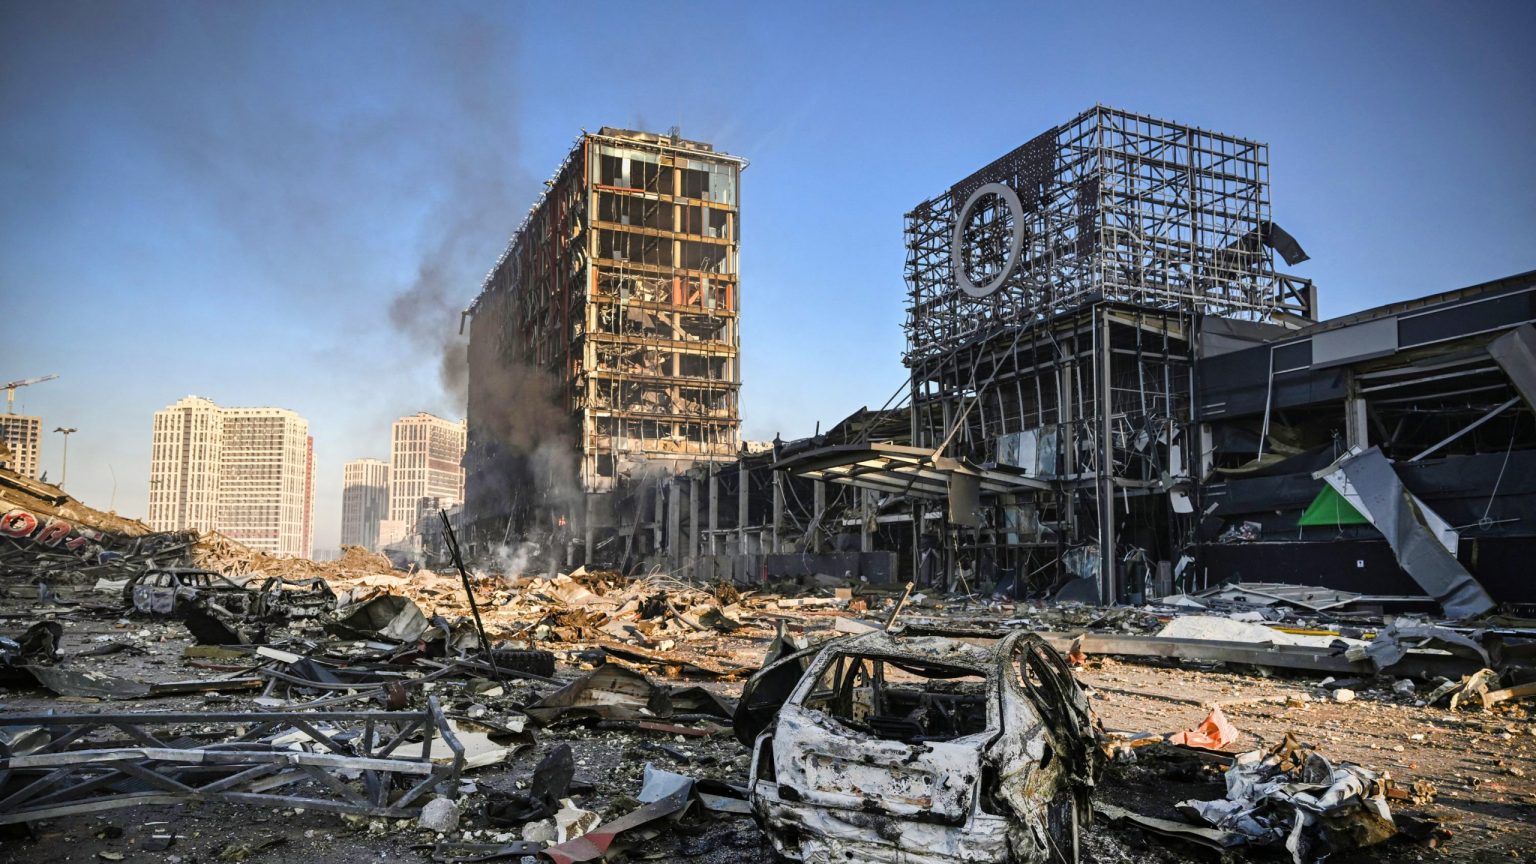 Retroville shopping mall in Kyiv is destroyed during the war in Ukraine